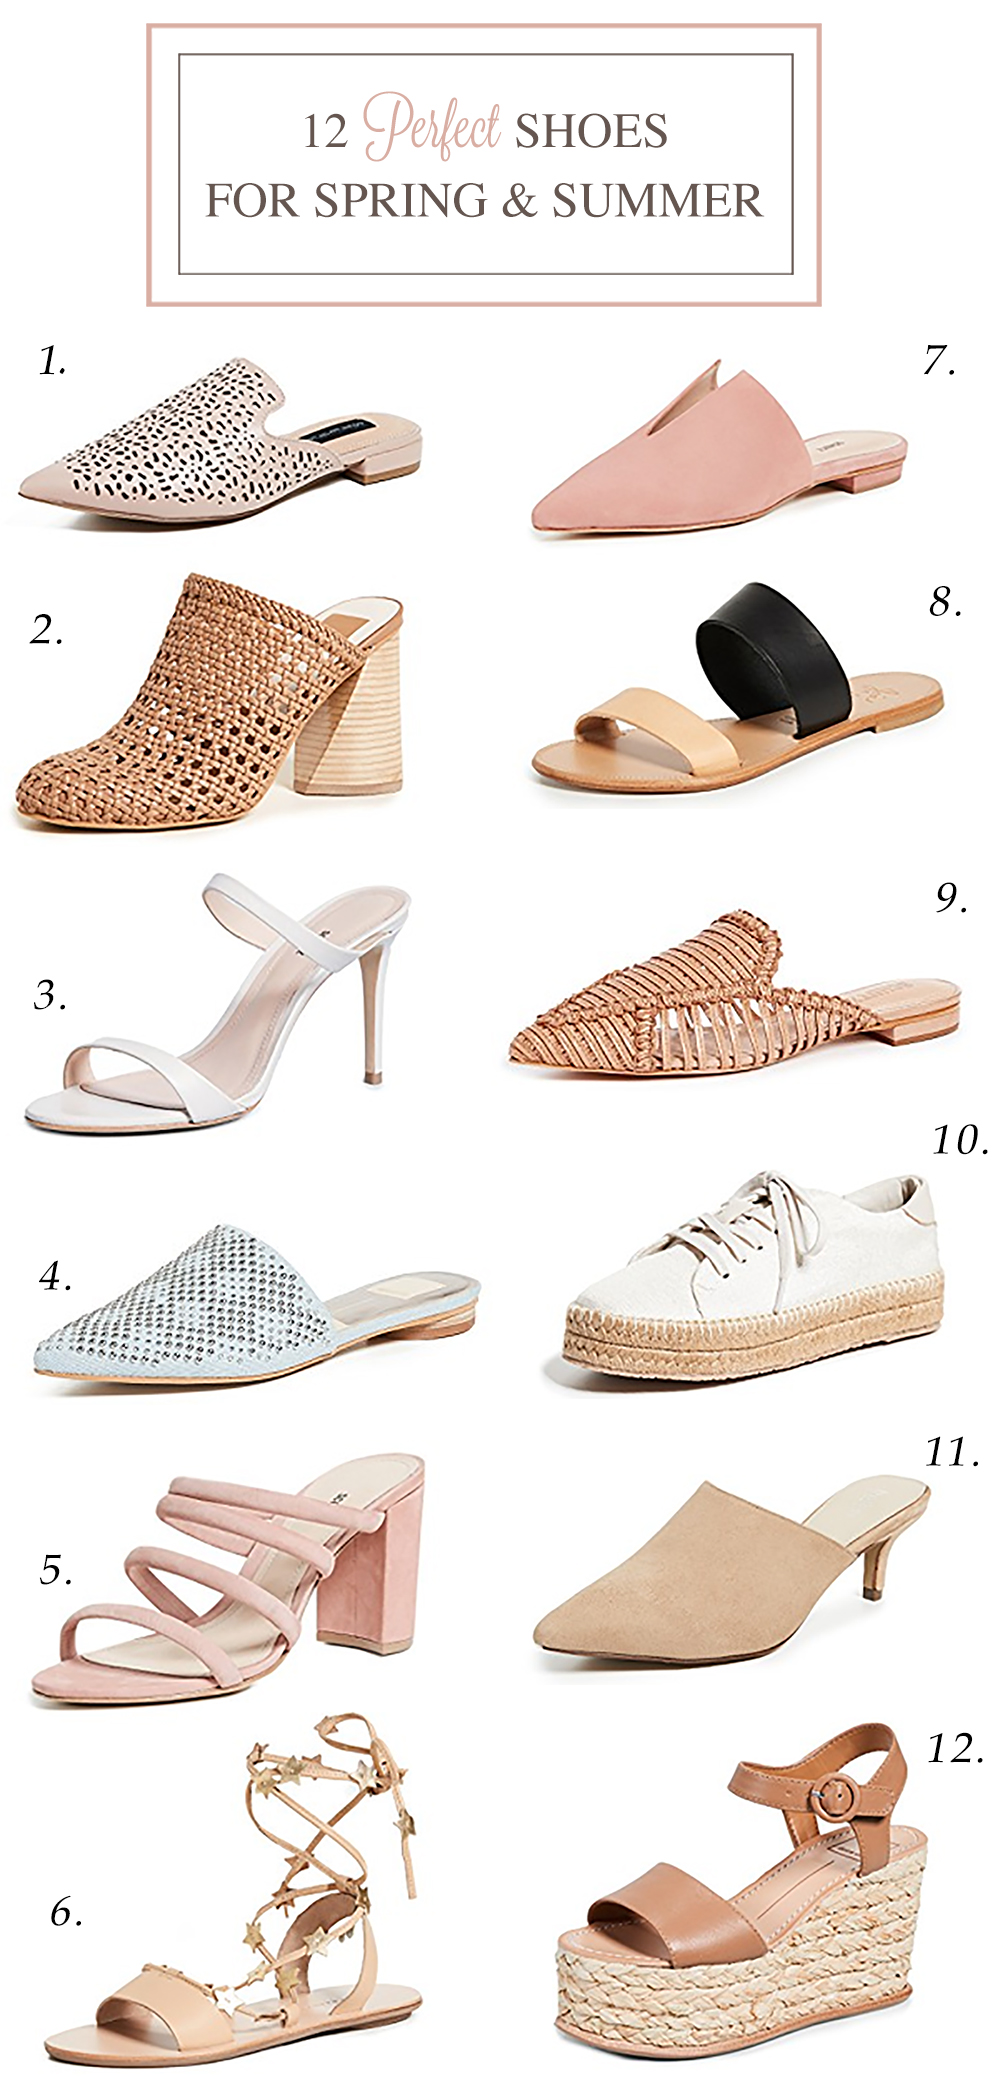 12 perfect shoes for spring and summer 1